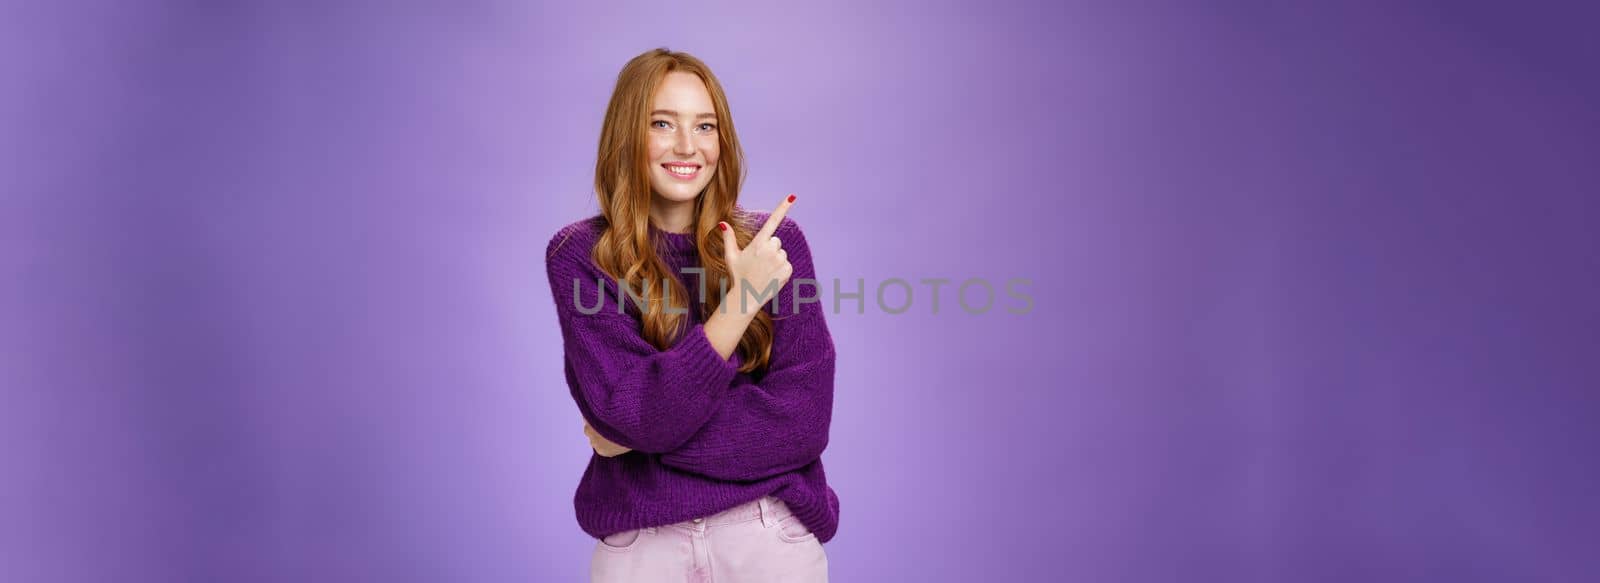 Lifestyle. Charming friendly-looking bright redhead woman with freckles and makeup in purple warm sweater pointing at upper left corner and smiling delighted and cute at camera as showing cool place hang out.